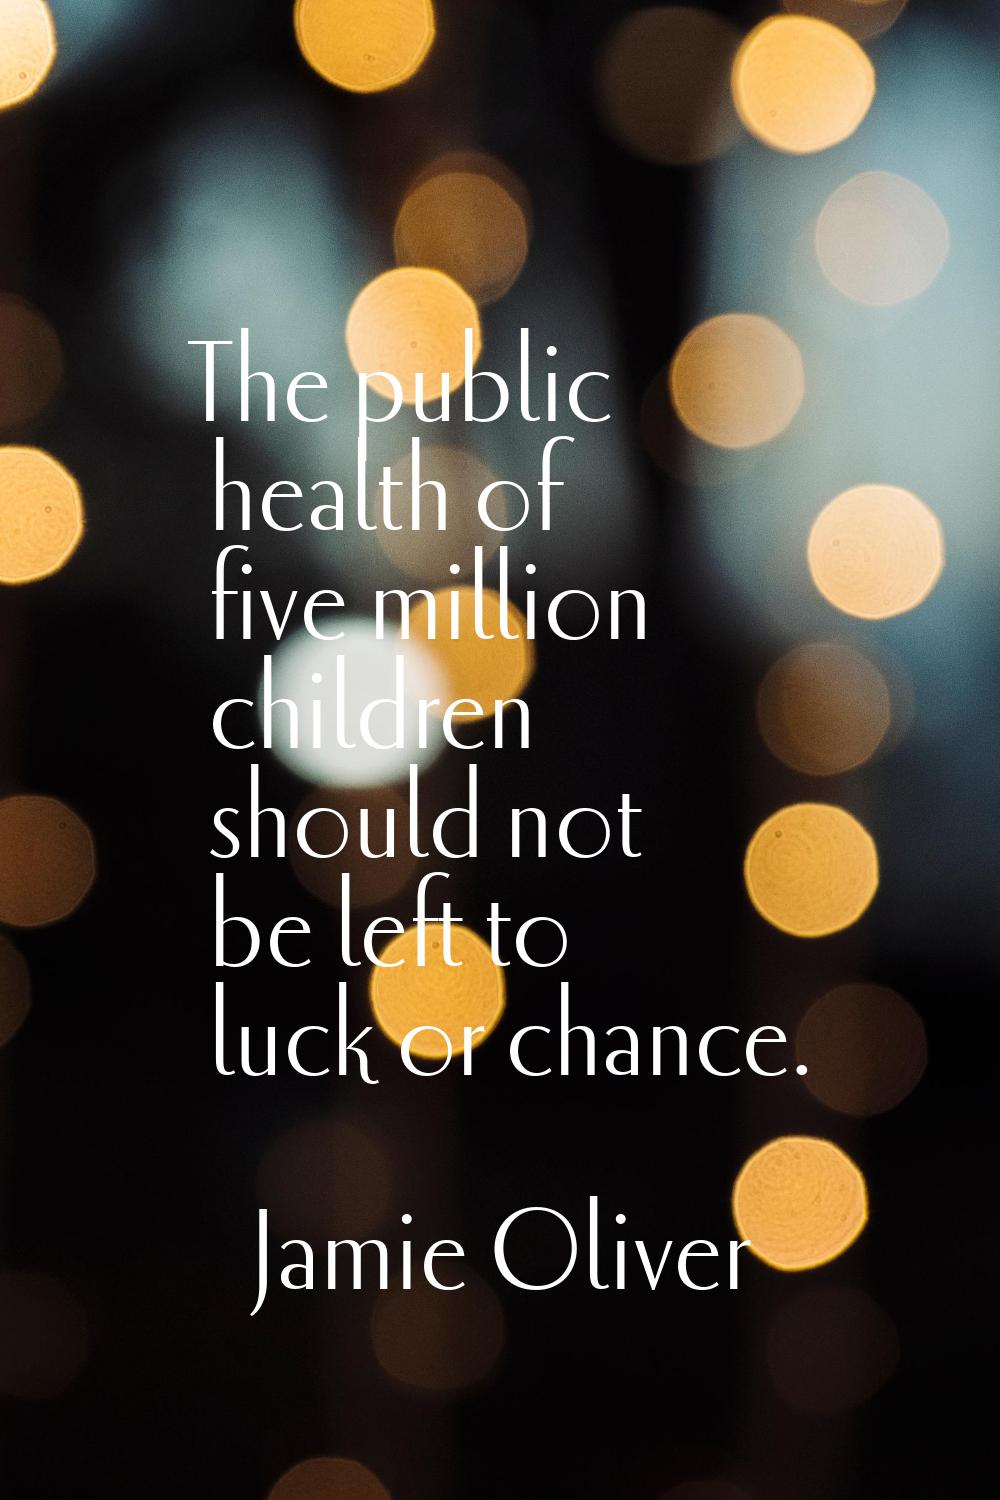 The public health of five million children should not be left to luck or chance.